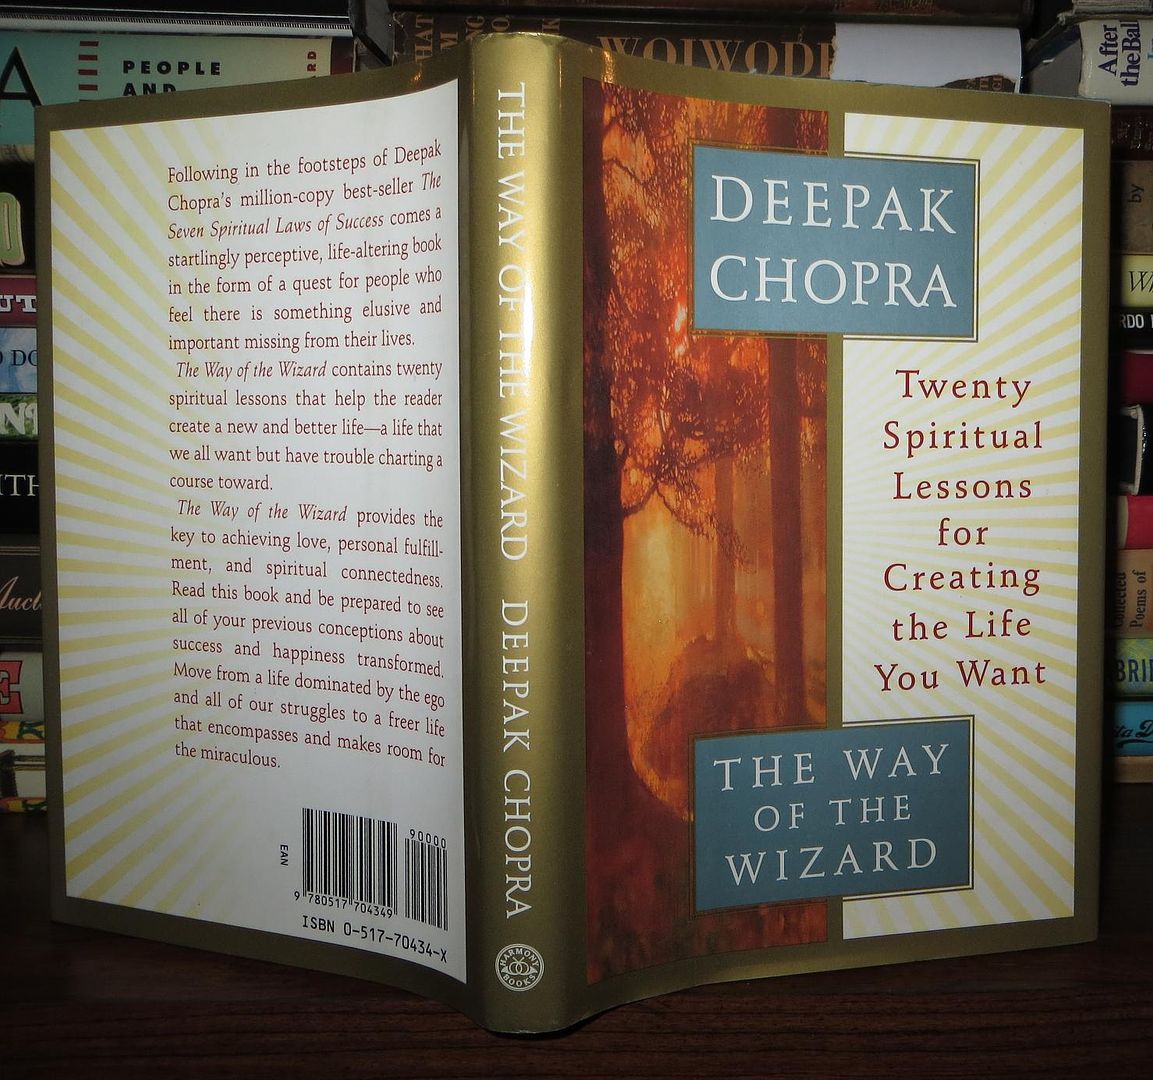 DEEPAK CHOPRA - The Way of the Wizard Twenty Spiritual Lessons for Creating the Life You Want